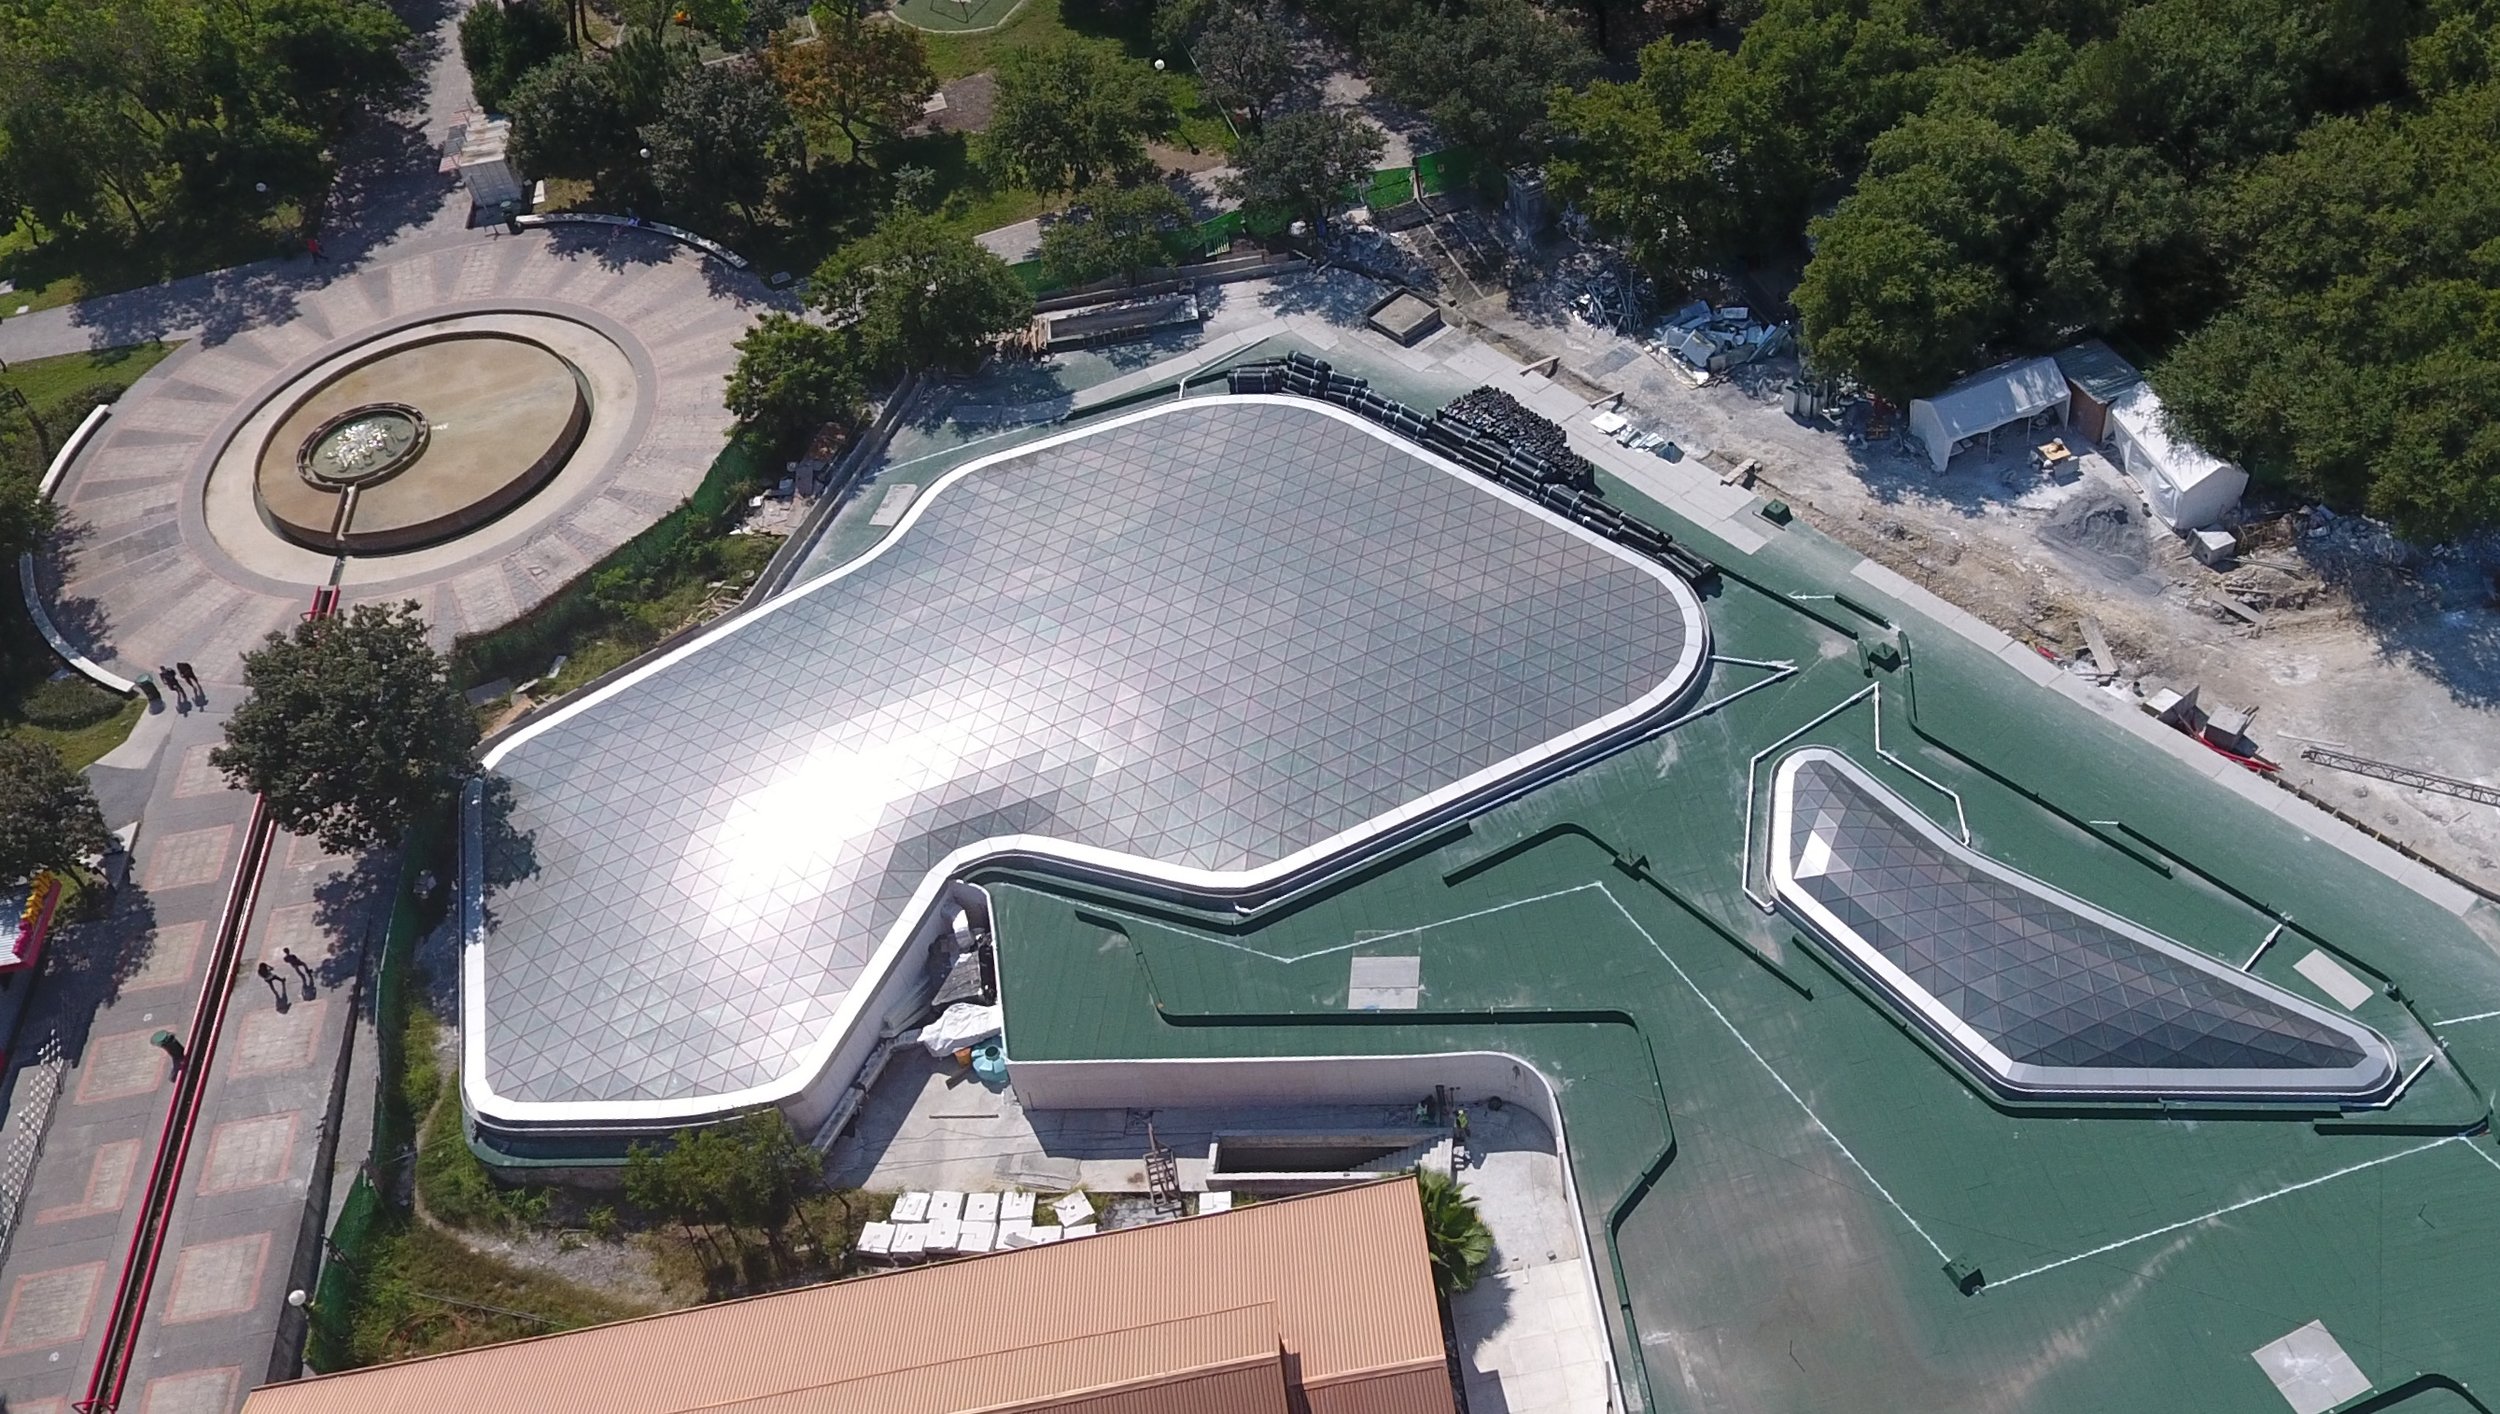 Free-form skylights cover the Papalote Children's Museum in Monterrey, Mexico